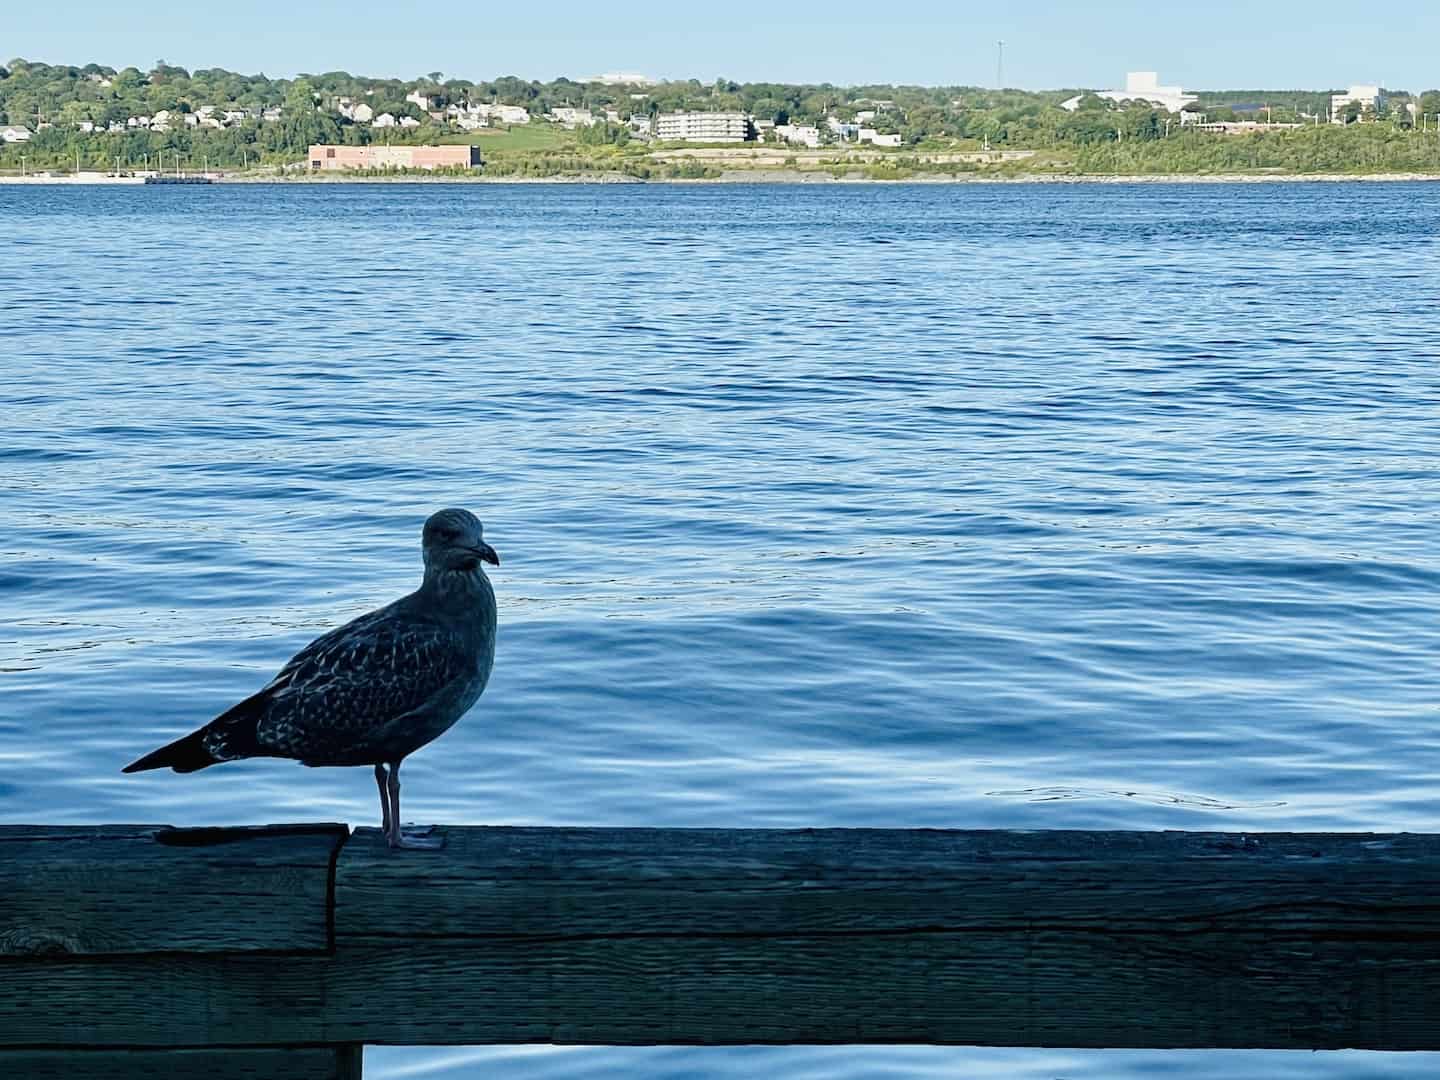 A bird stands on a ledge along the Halifax harbor.